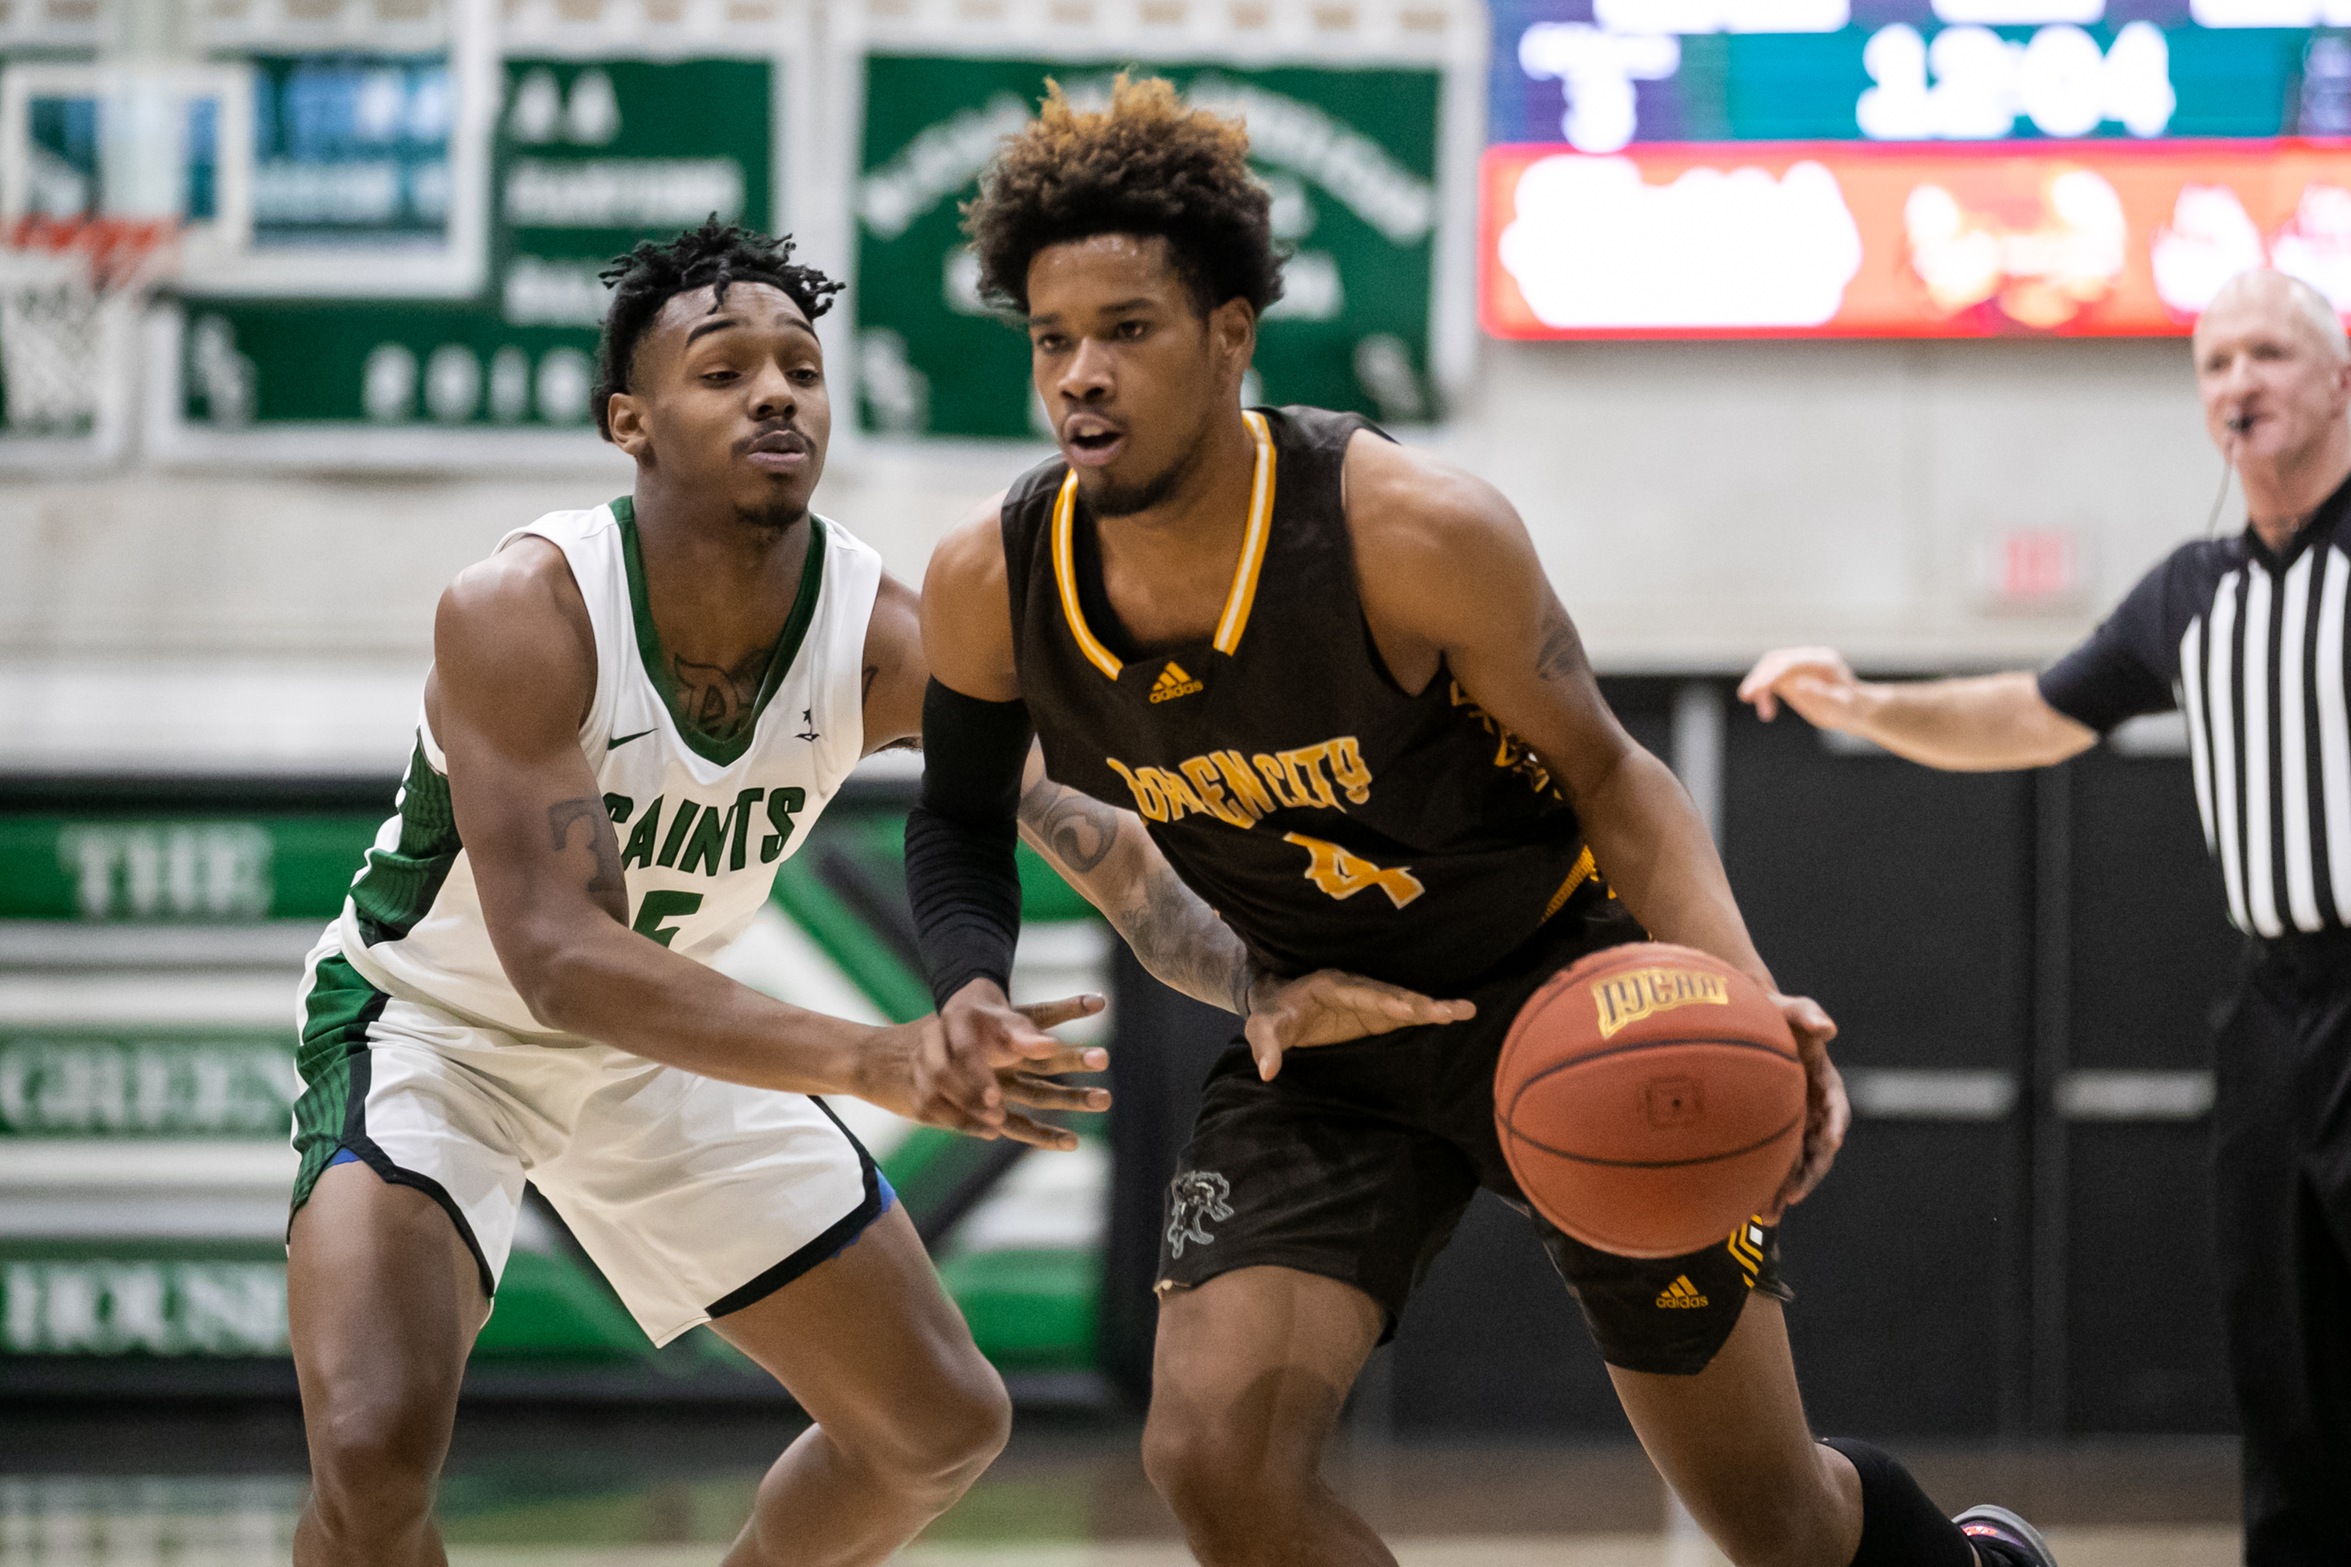 Elliott leads three in double figures as Broncbusters take down Saints